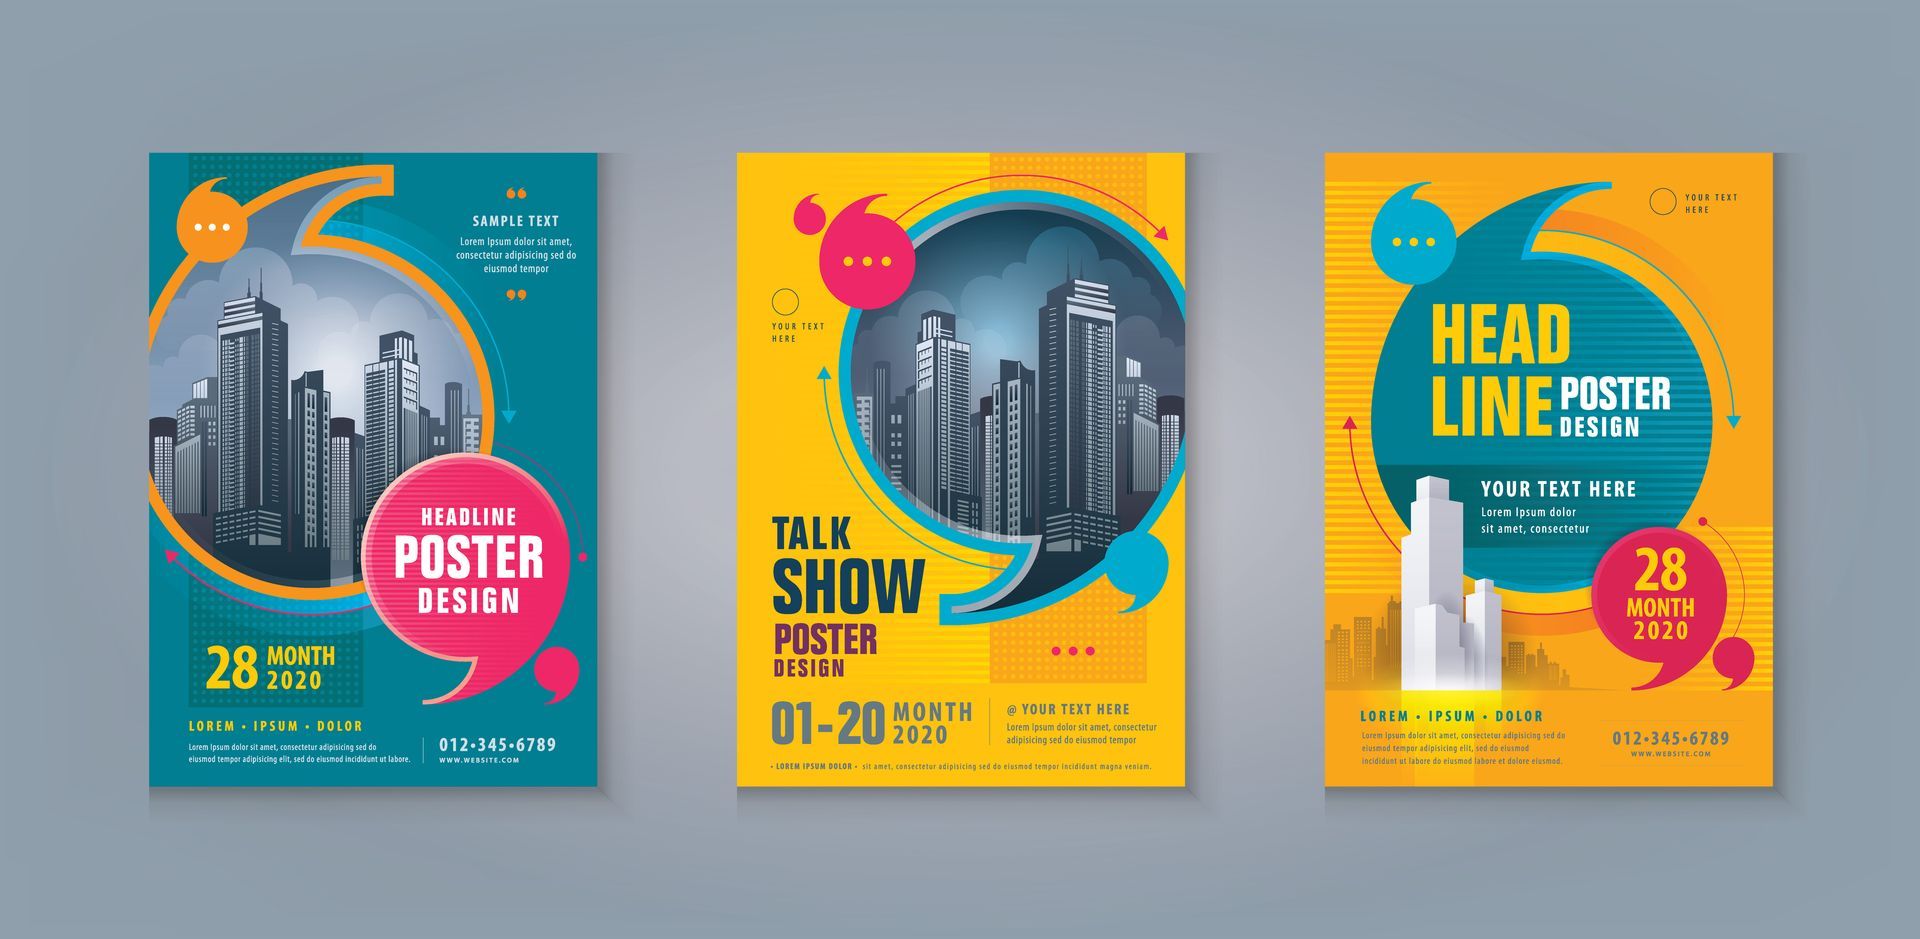 Chatsworth Custom Posters For Conferences & Trade Shows